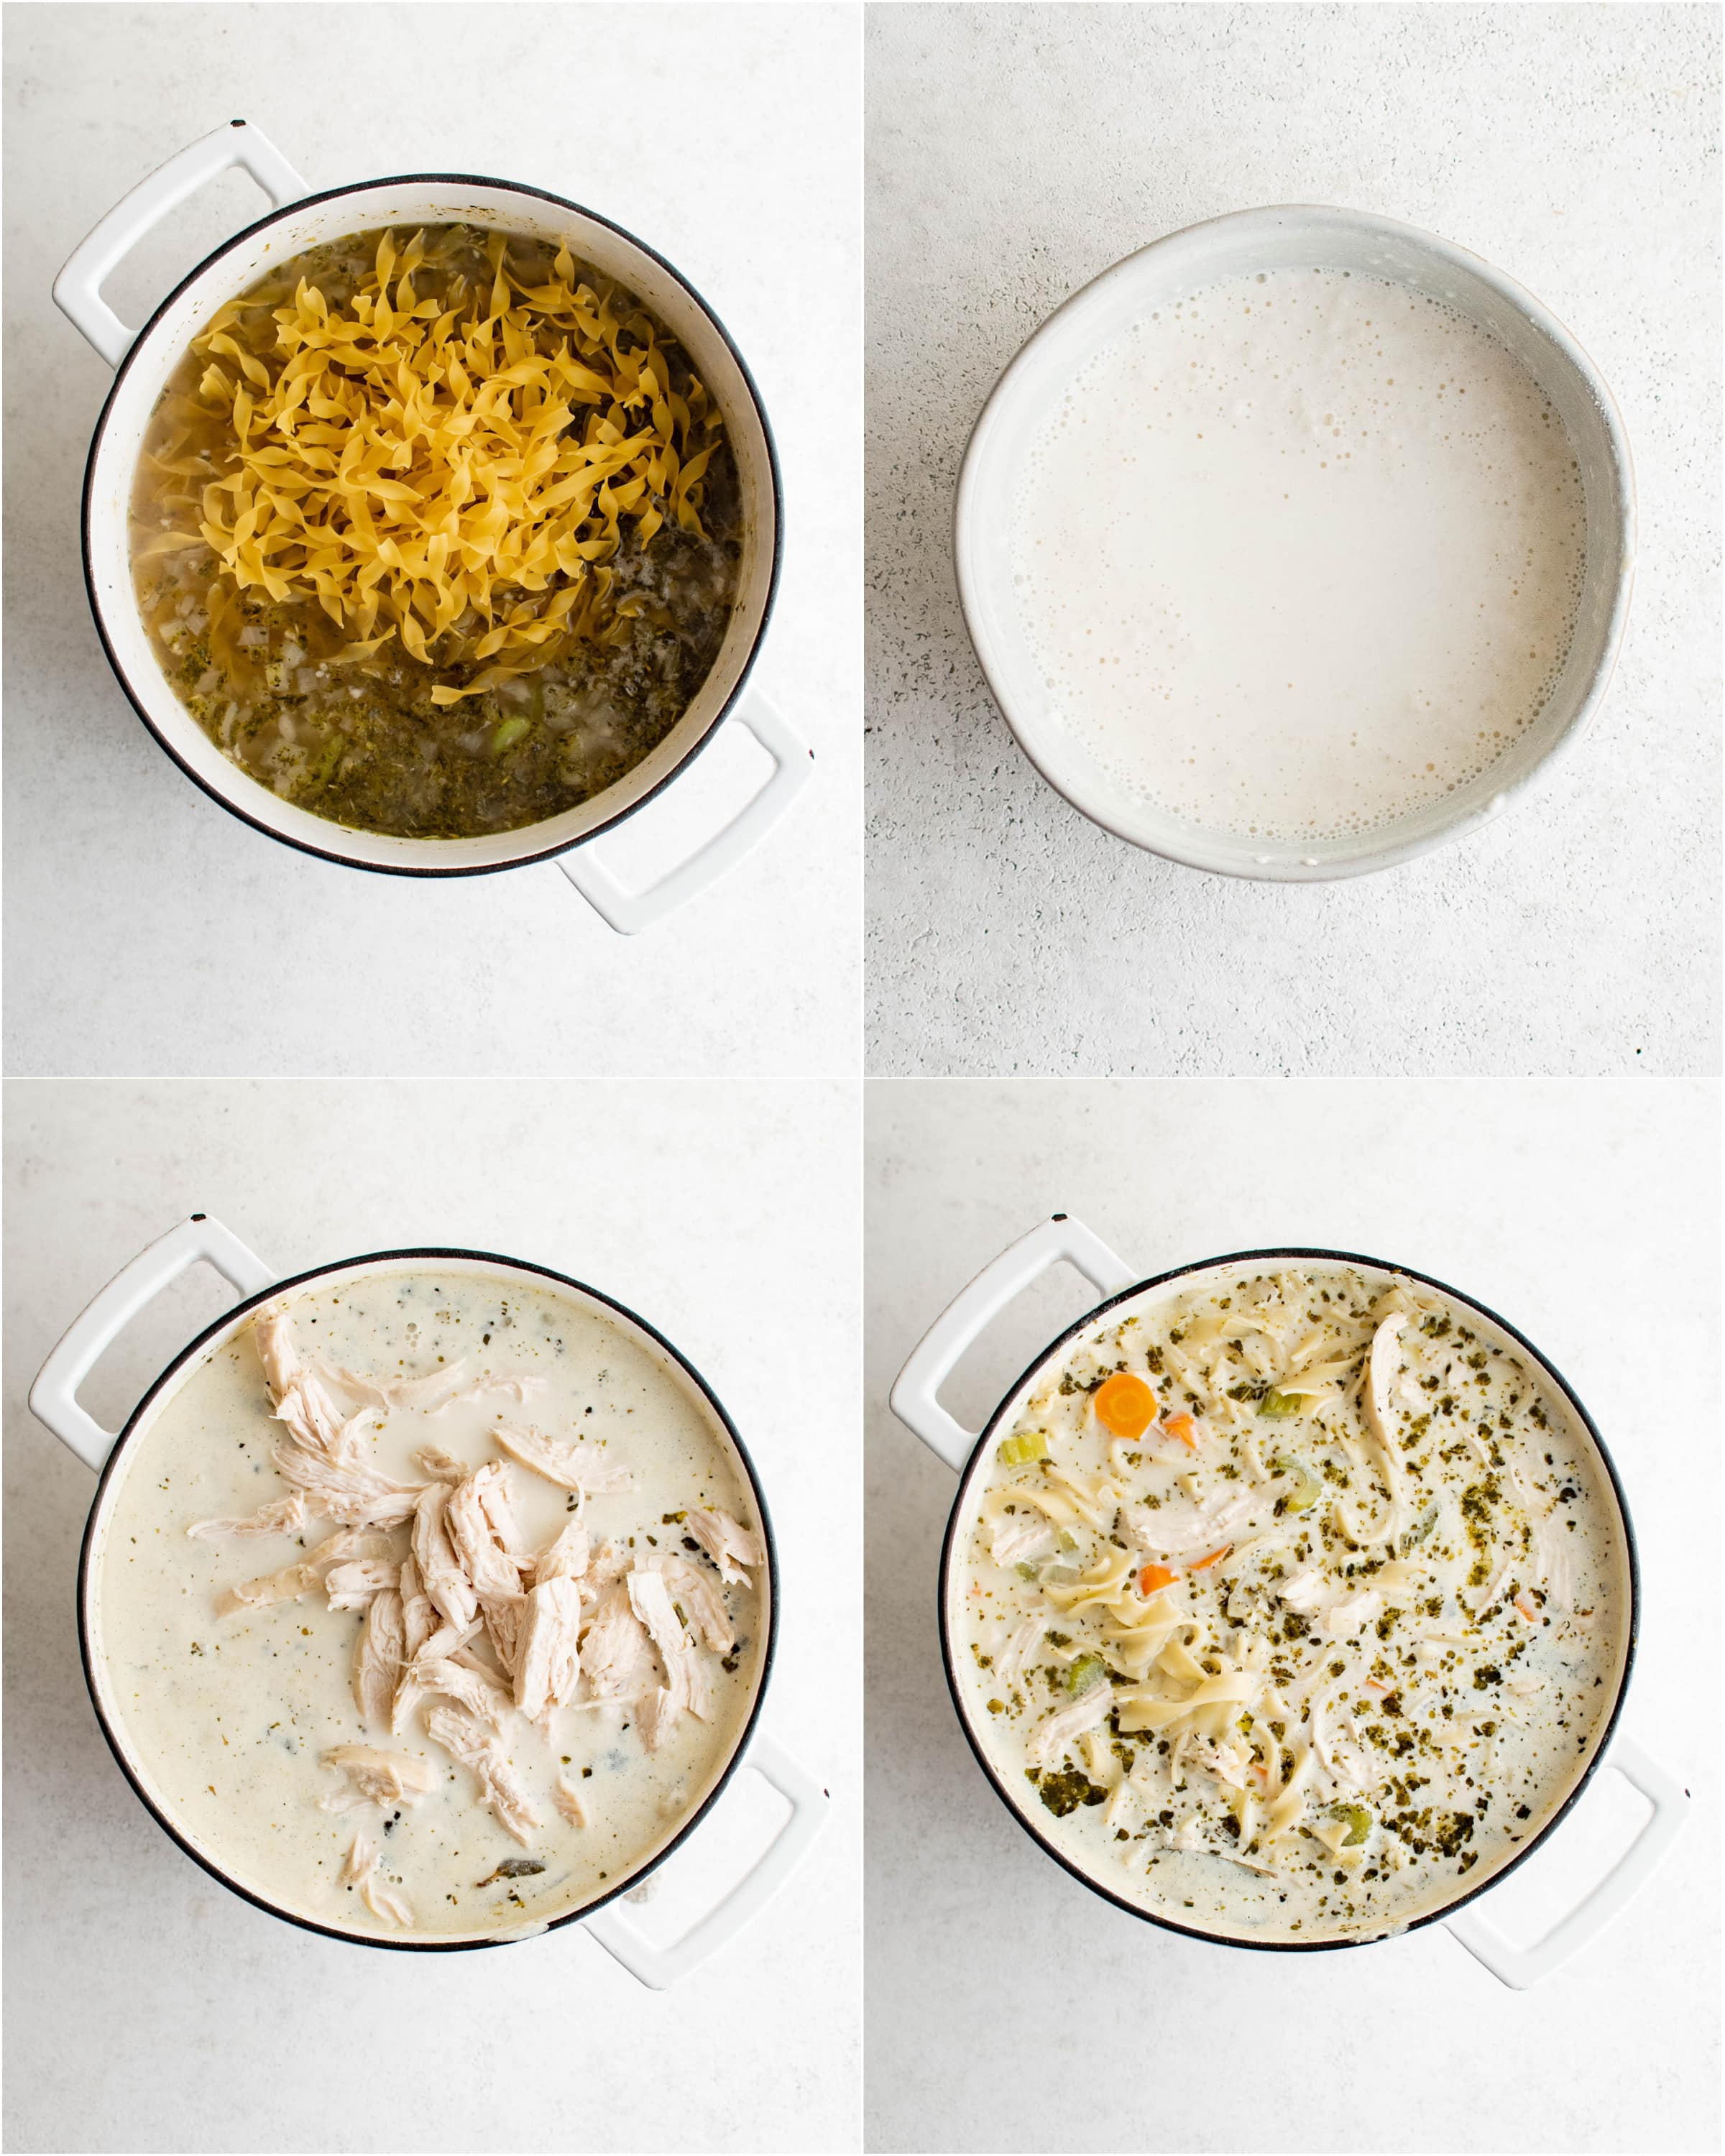 A collage of four images: The first image shows a large pot filled with simmering vegetables in chicken broth and uncooked egg noodles; the second image shows a white shallow bowl filled with mixed together half-and-half plus flour; the third image shows a large white pot of creamy noodle soup with shredded chicken breast adding back to the pot; the fourth image shows a pot of cooked and ready to serve creamy chicken noodle soup.